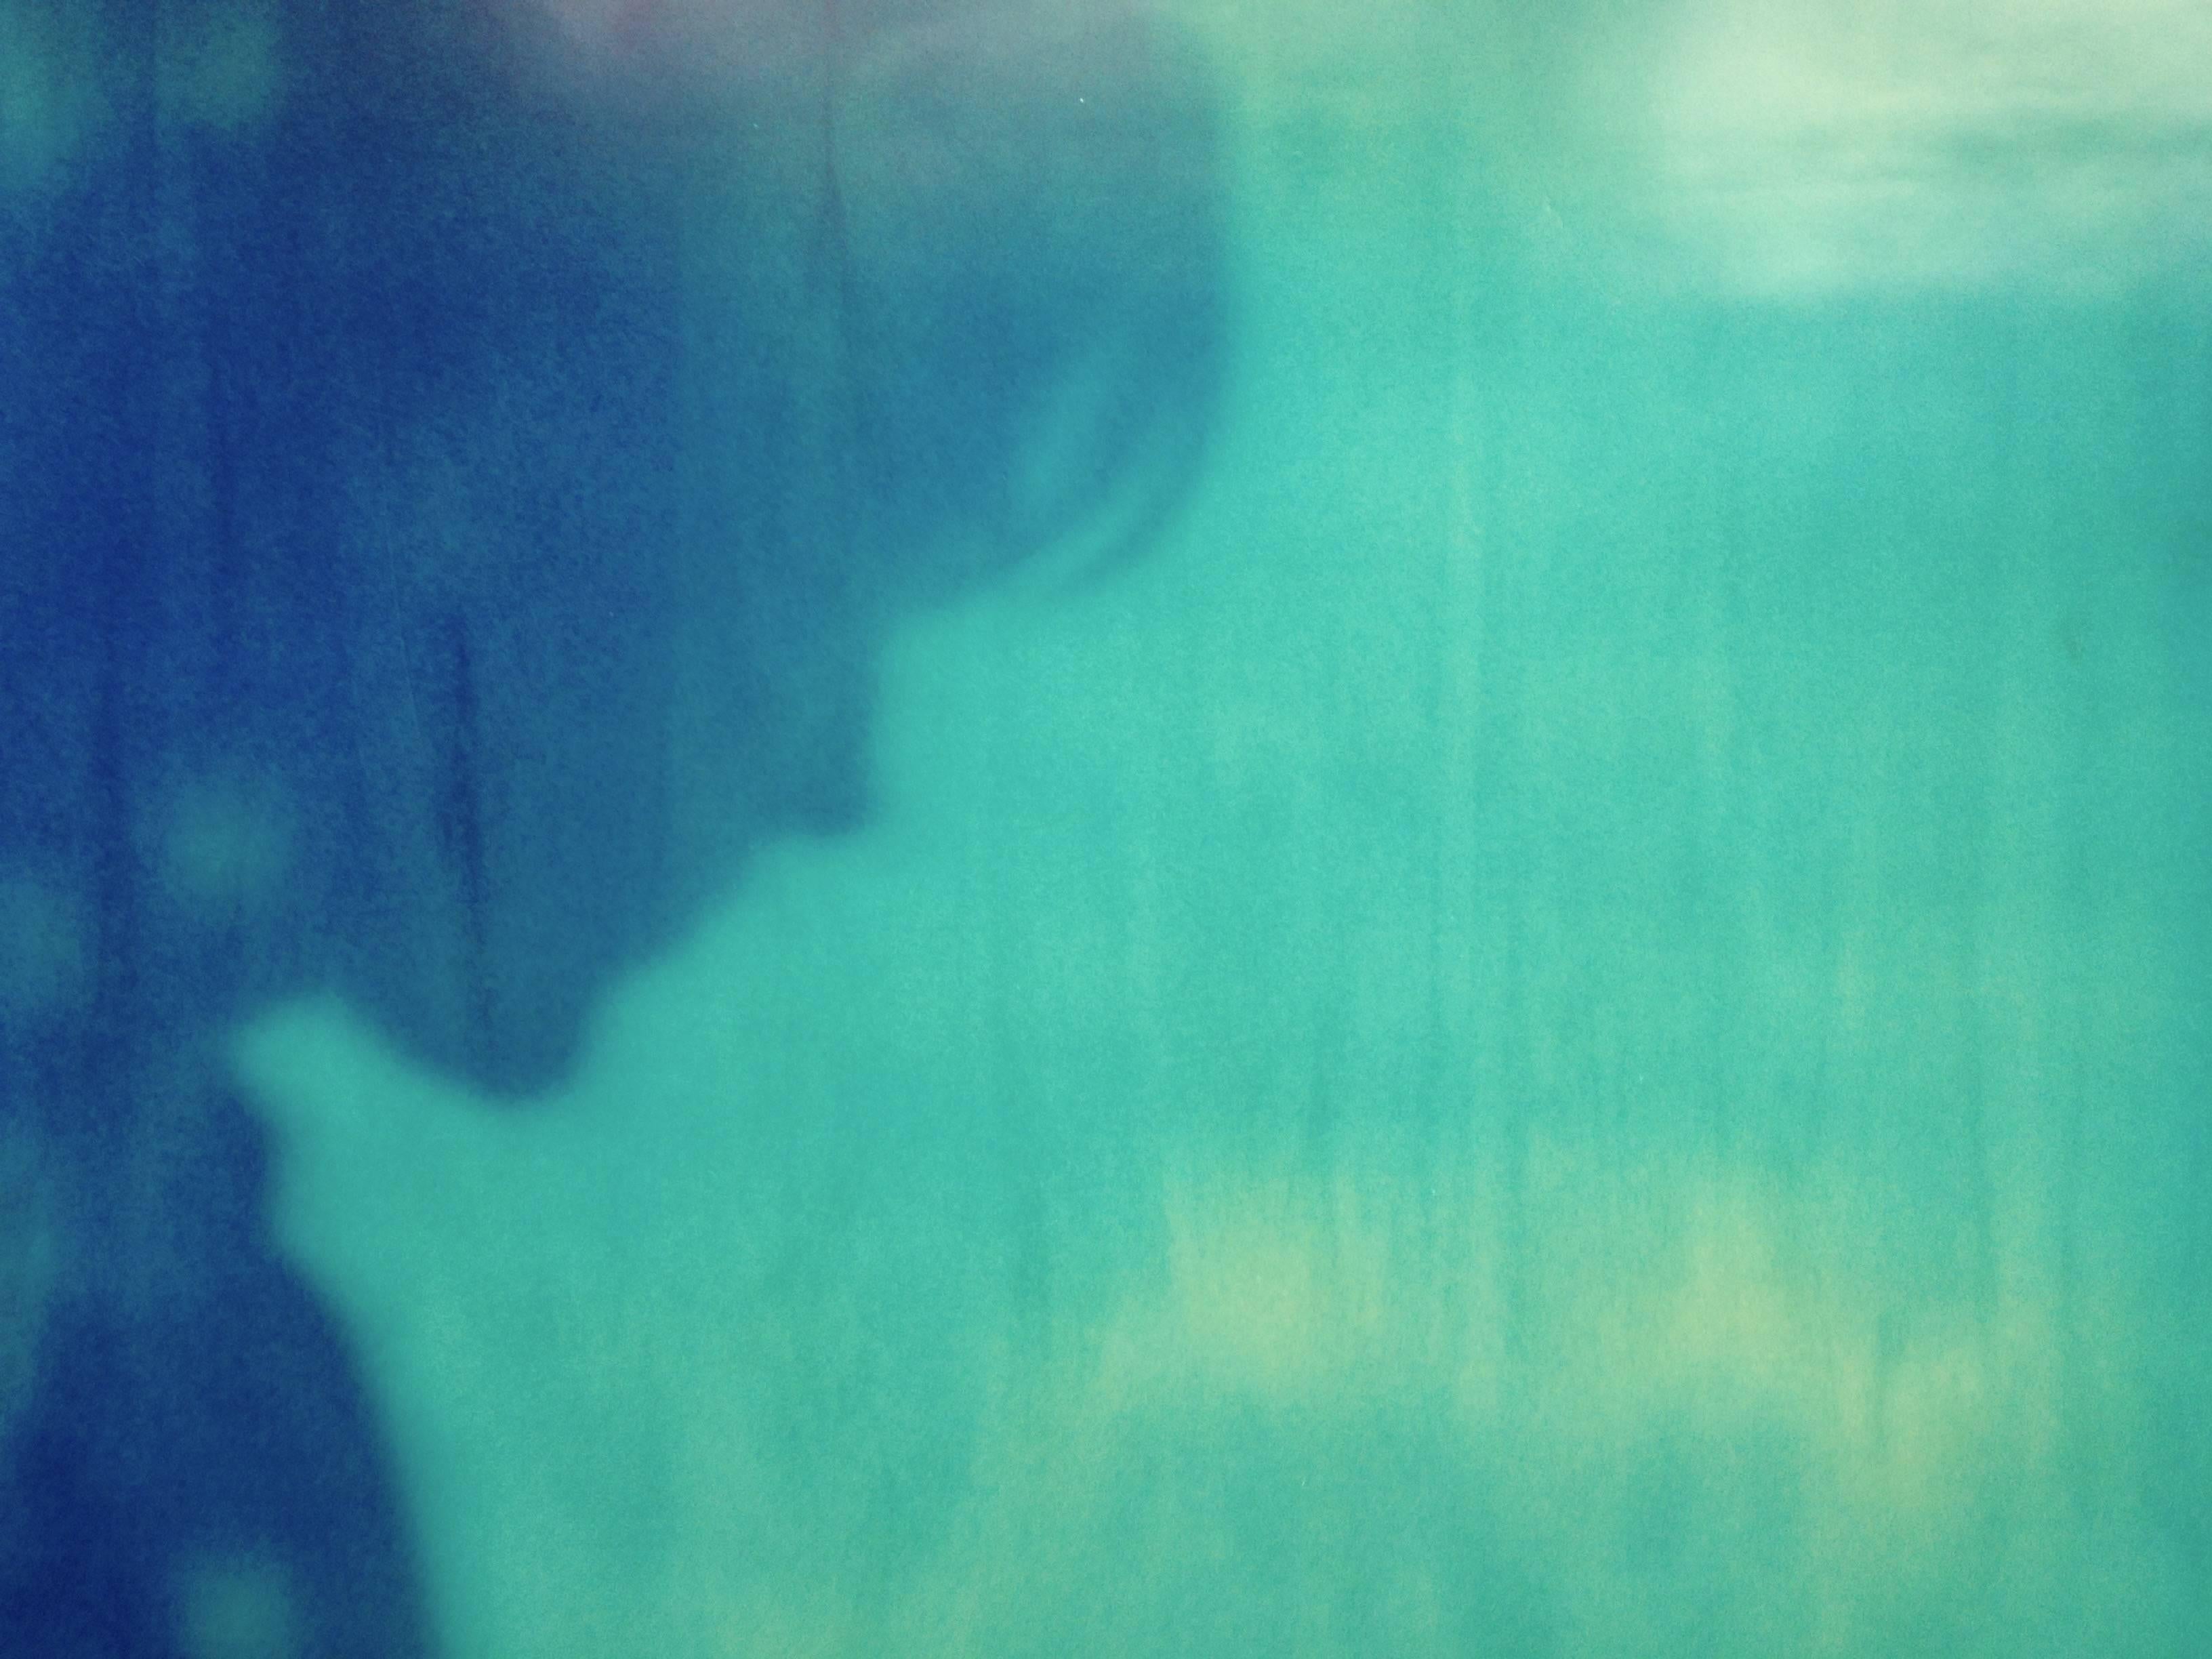 Jelly Fish - Contemporary, Expired, Polaroid, Photograph, Abstract, Ryan Gosling - Blue Abstract Photograph by Stefanie Schneider